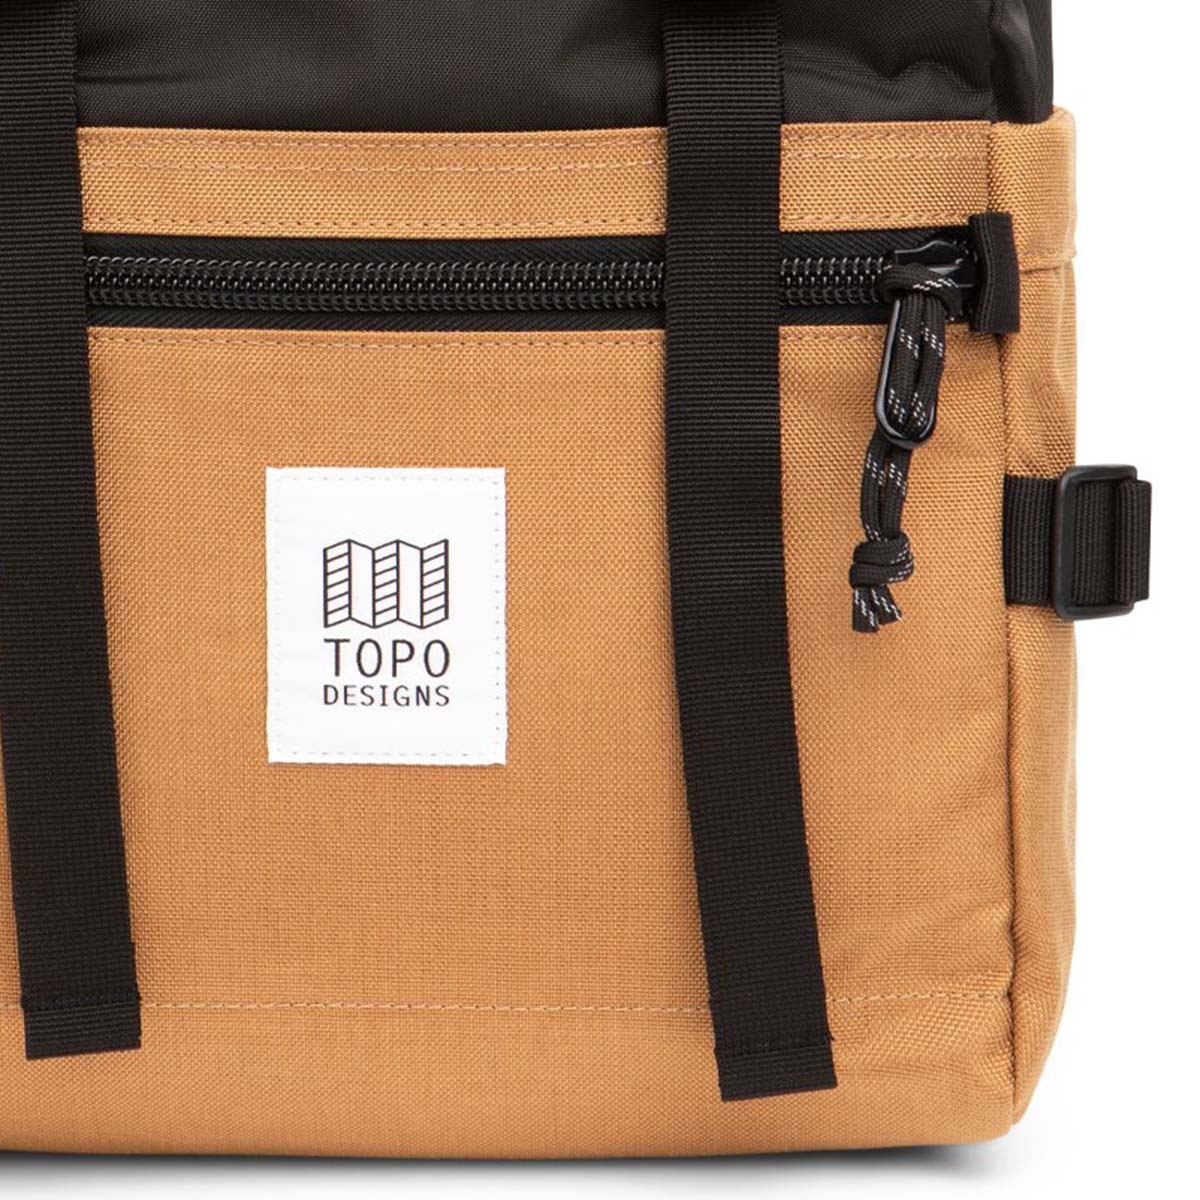 Topo Designs Rover Pack Classic Khaki/Black, timeless backpack with great functionalities